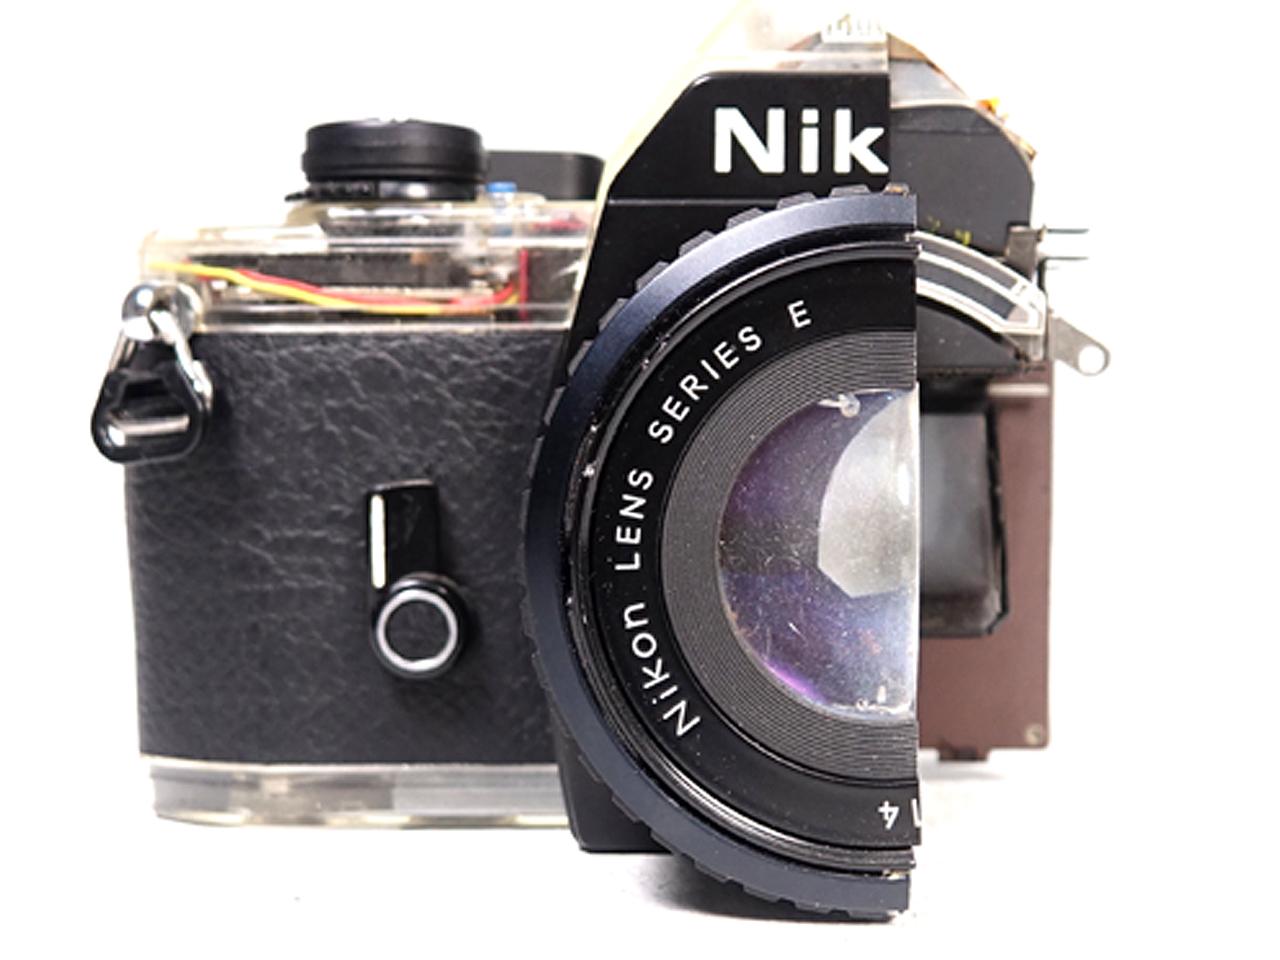 This was a full size precision cut-away of a real Nikon EM. Everything was cut down the middle to show how complex the camera was. They cut everything including the lenses. In addition the bottom and the top of the camera body was also cast in a